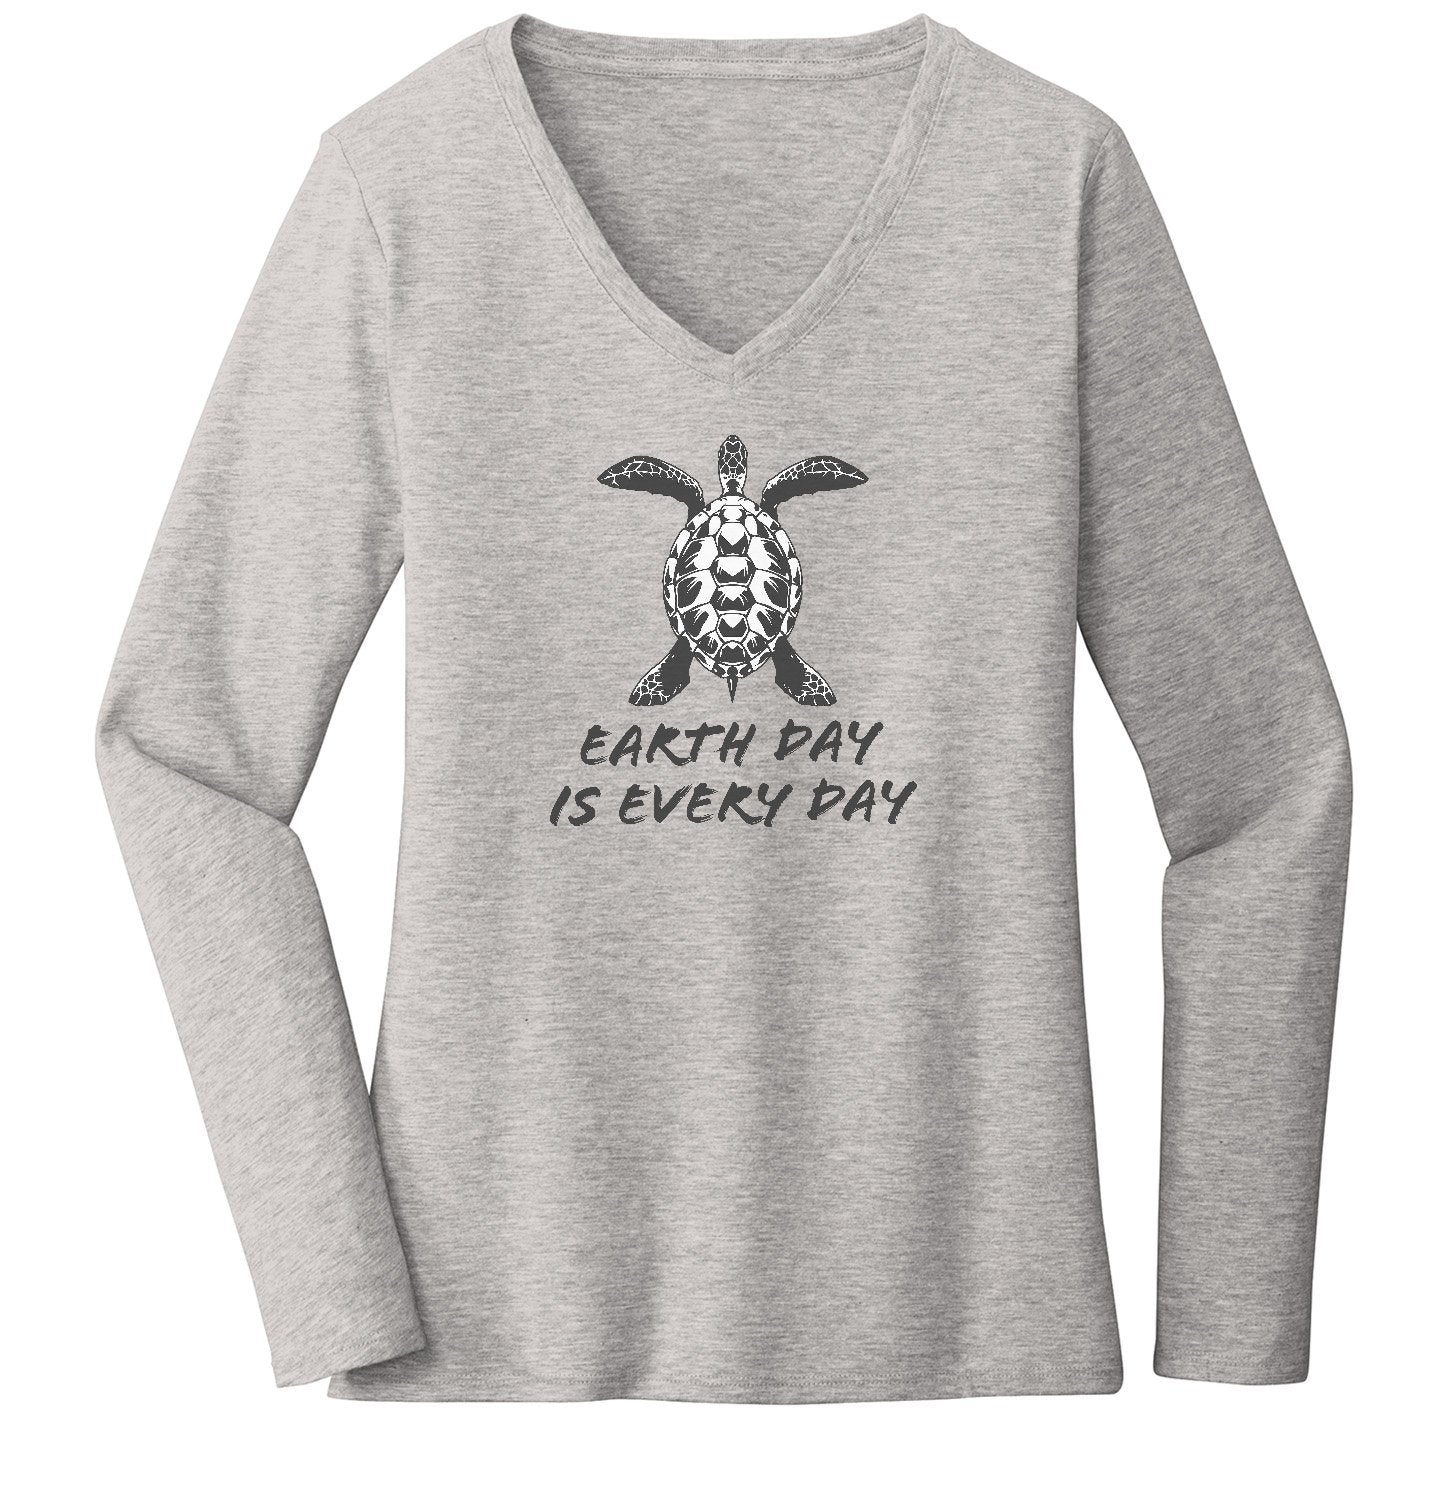 Earth Day is Every Day Sea Turtle - Women's V-Neck Long Sleeve T-Shirt